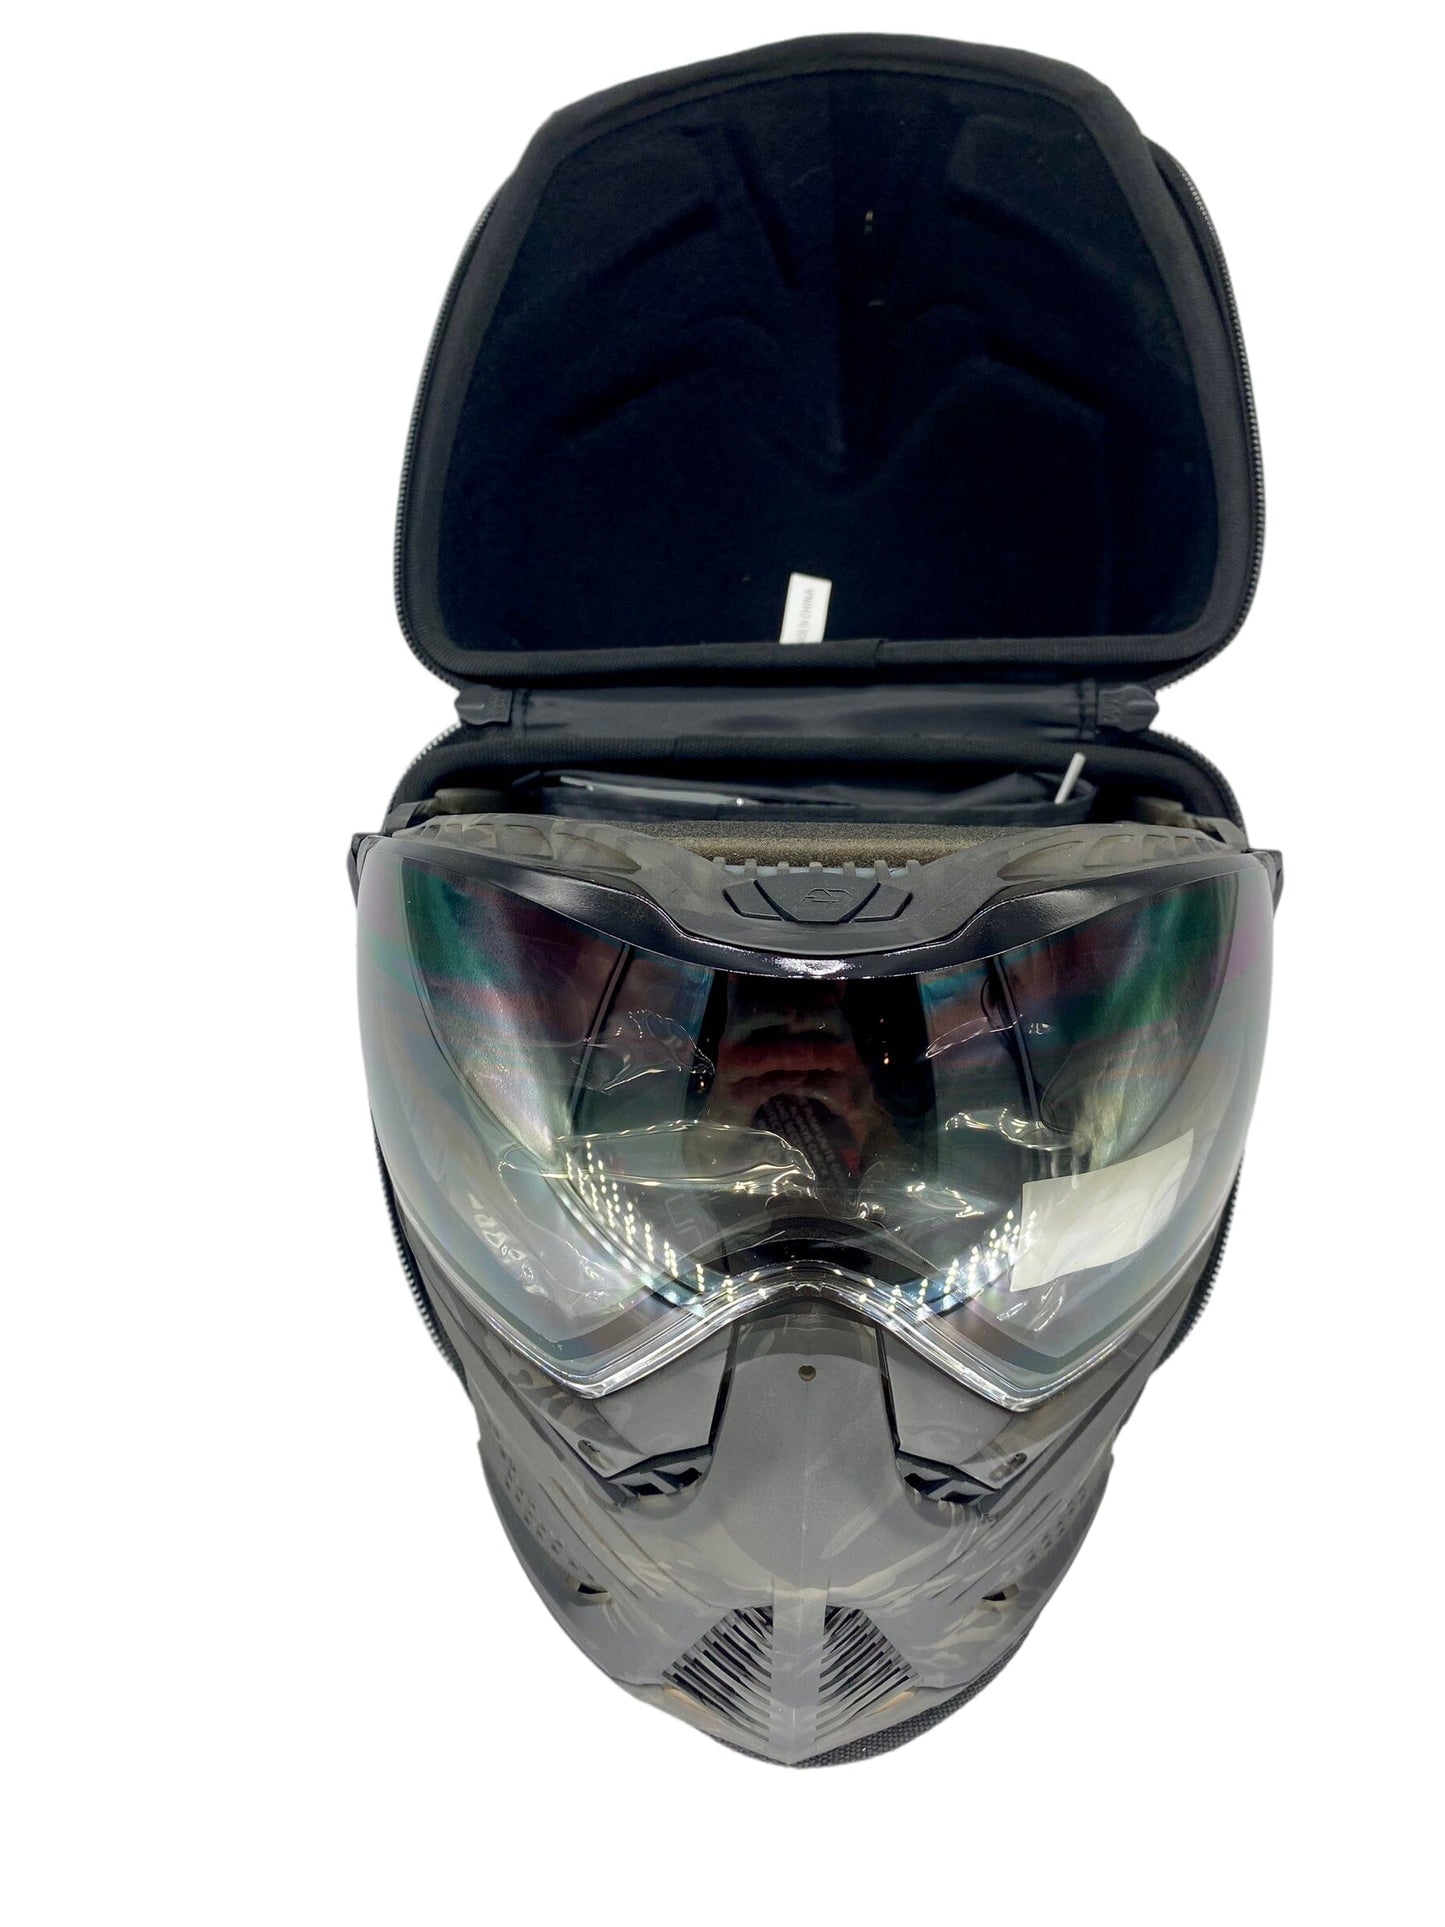 Used Brand New Push Unite Paintball Mask CPXBrosPaintball 